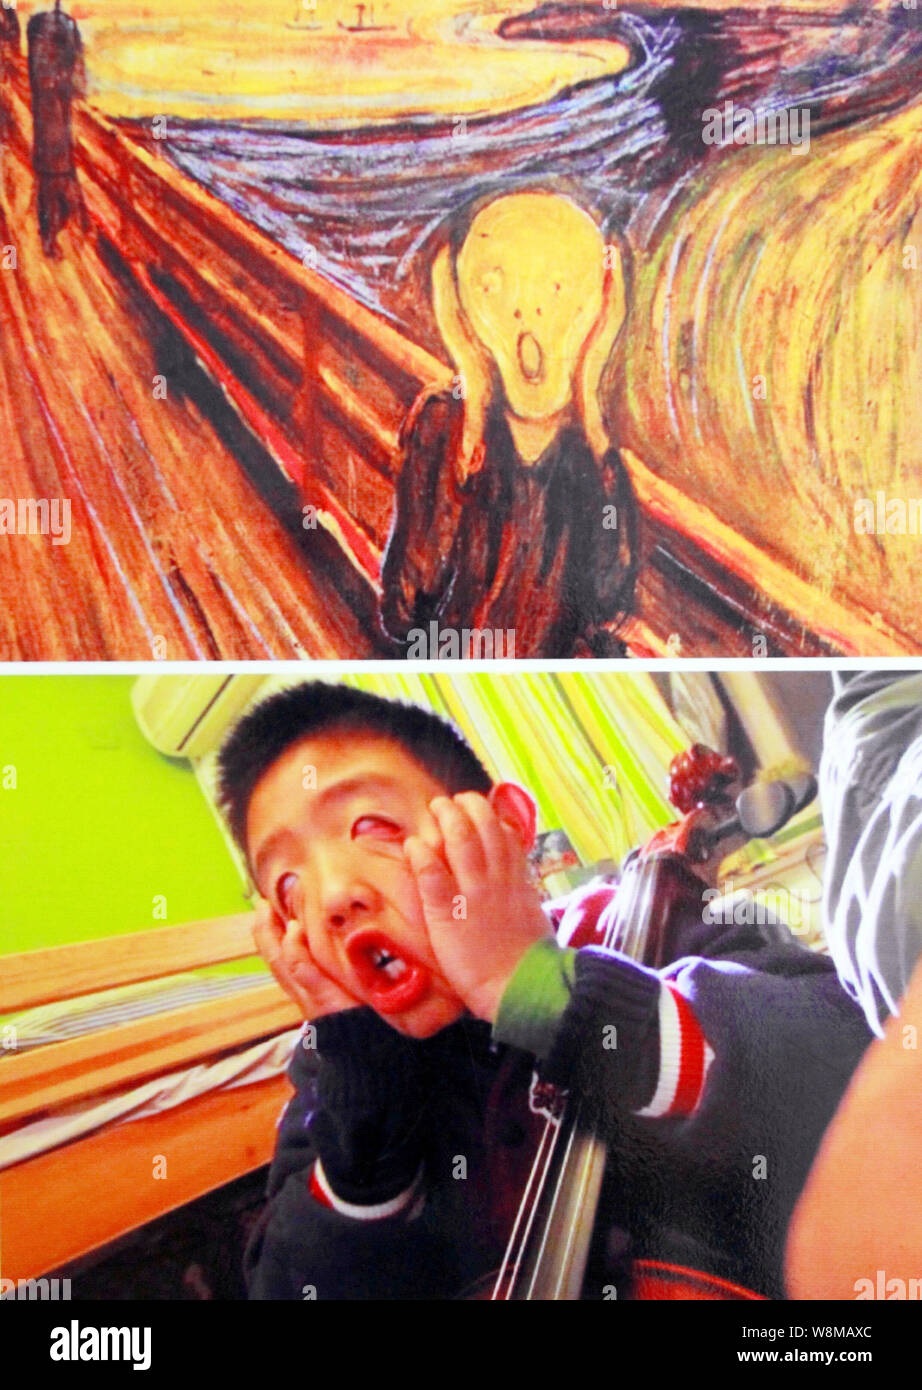 This composite picture shows Chinese pupil Chen Yuheng replicating the painting "The Scream" by Norwegian painter Edvard Munch during an art festival Stock Photo